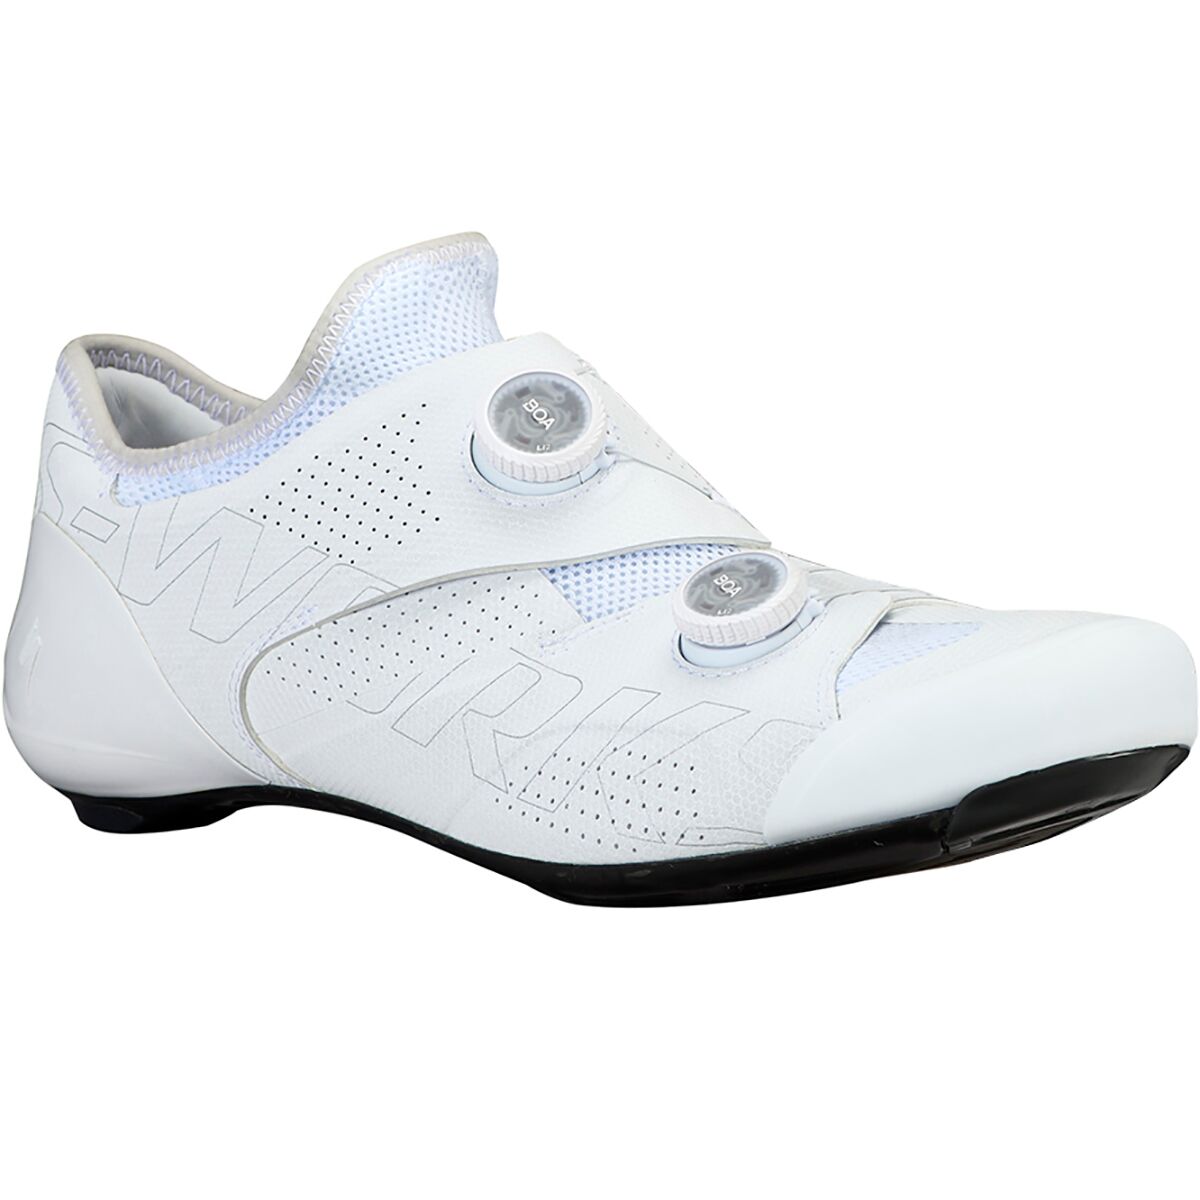 Specialized S-Works Ares Road Shoe White, 38.5 - Men's